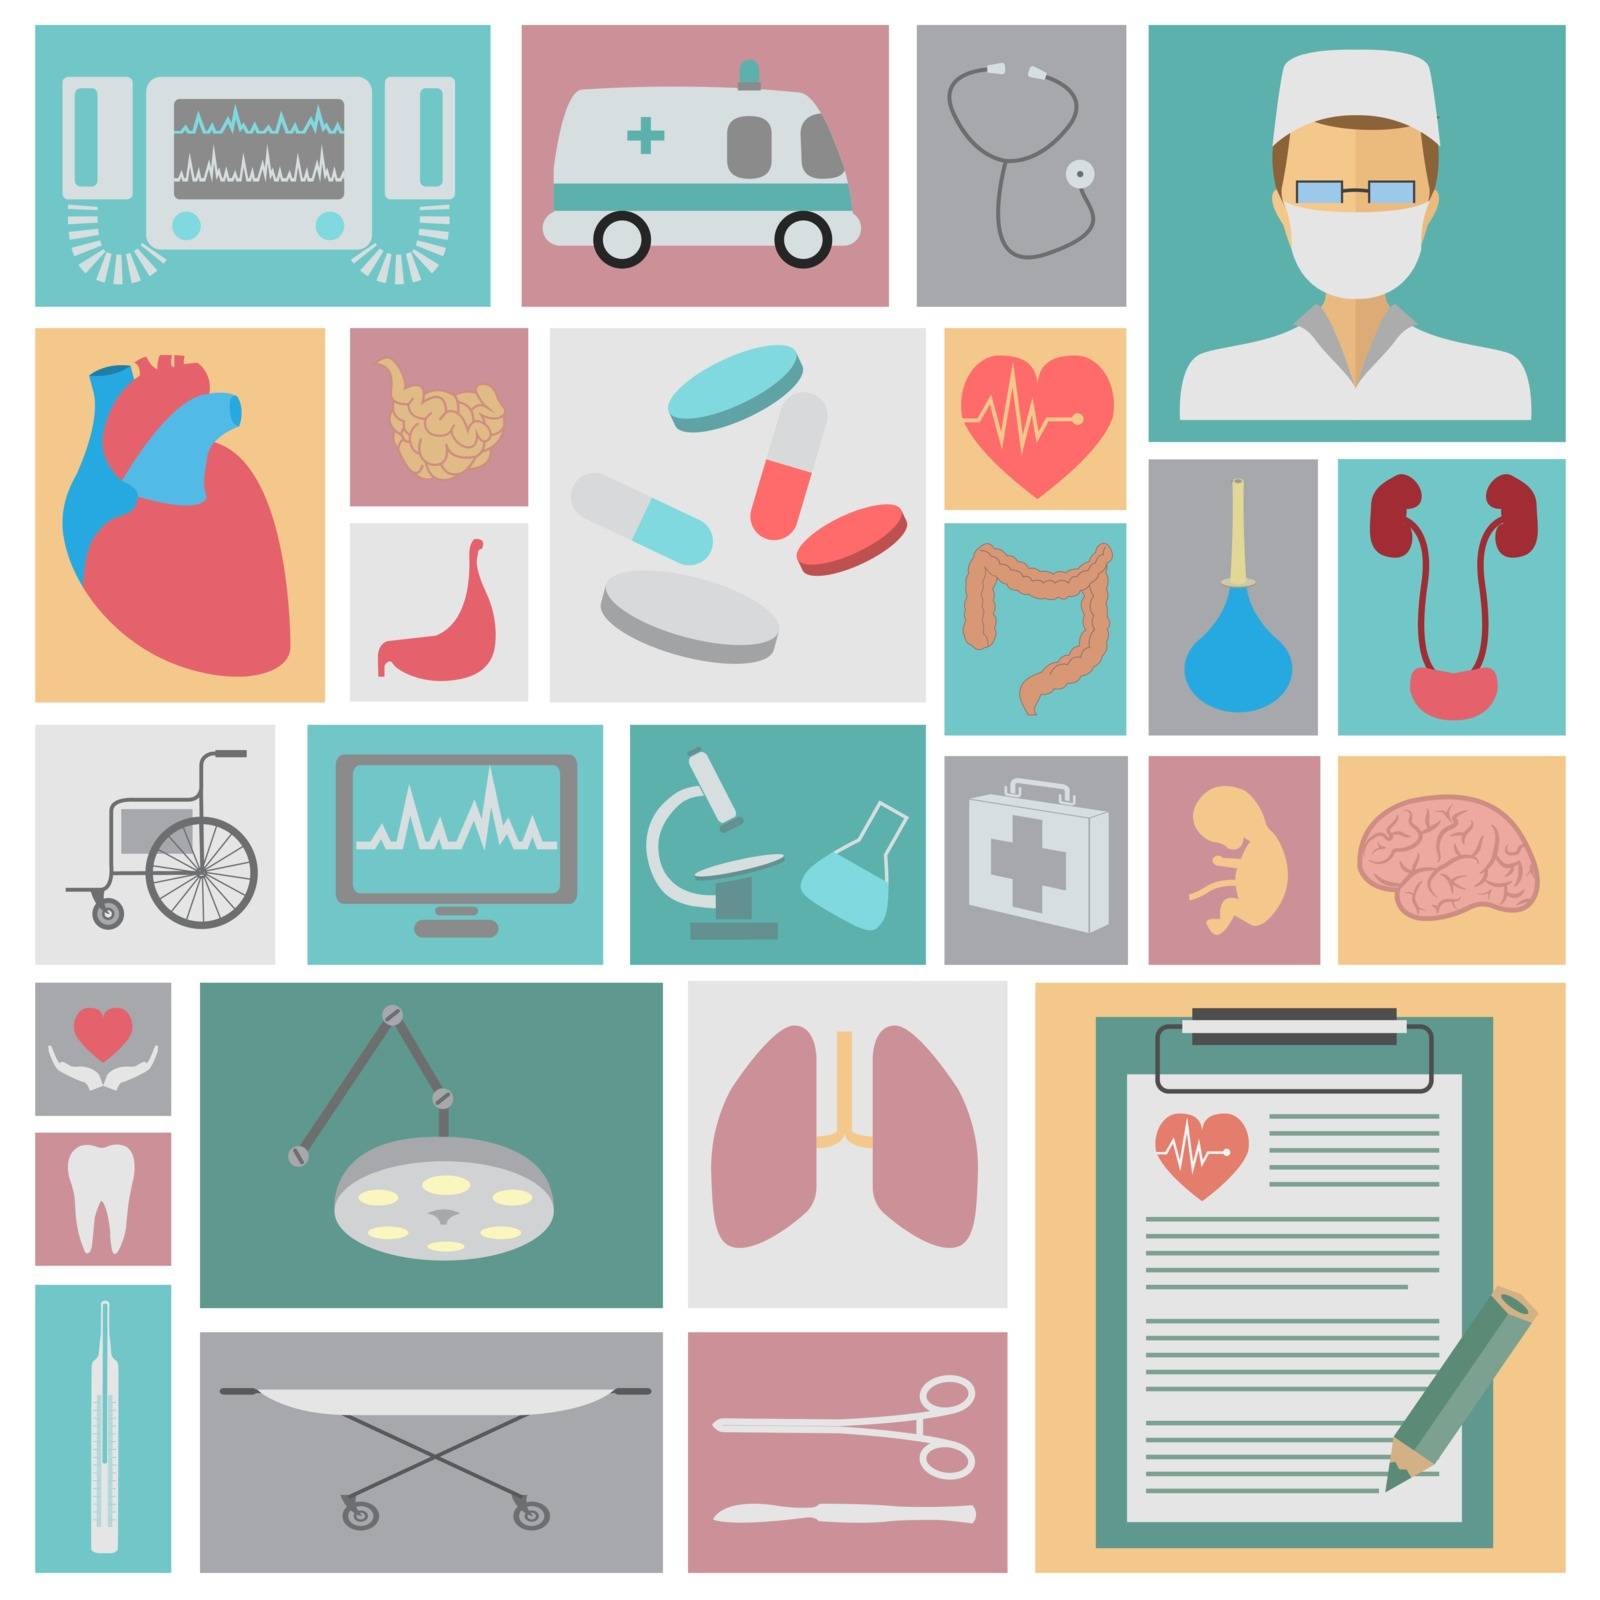 Medical and healthcare icon set. Vector illustration